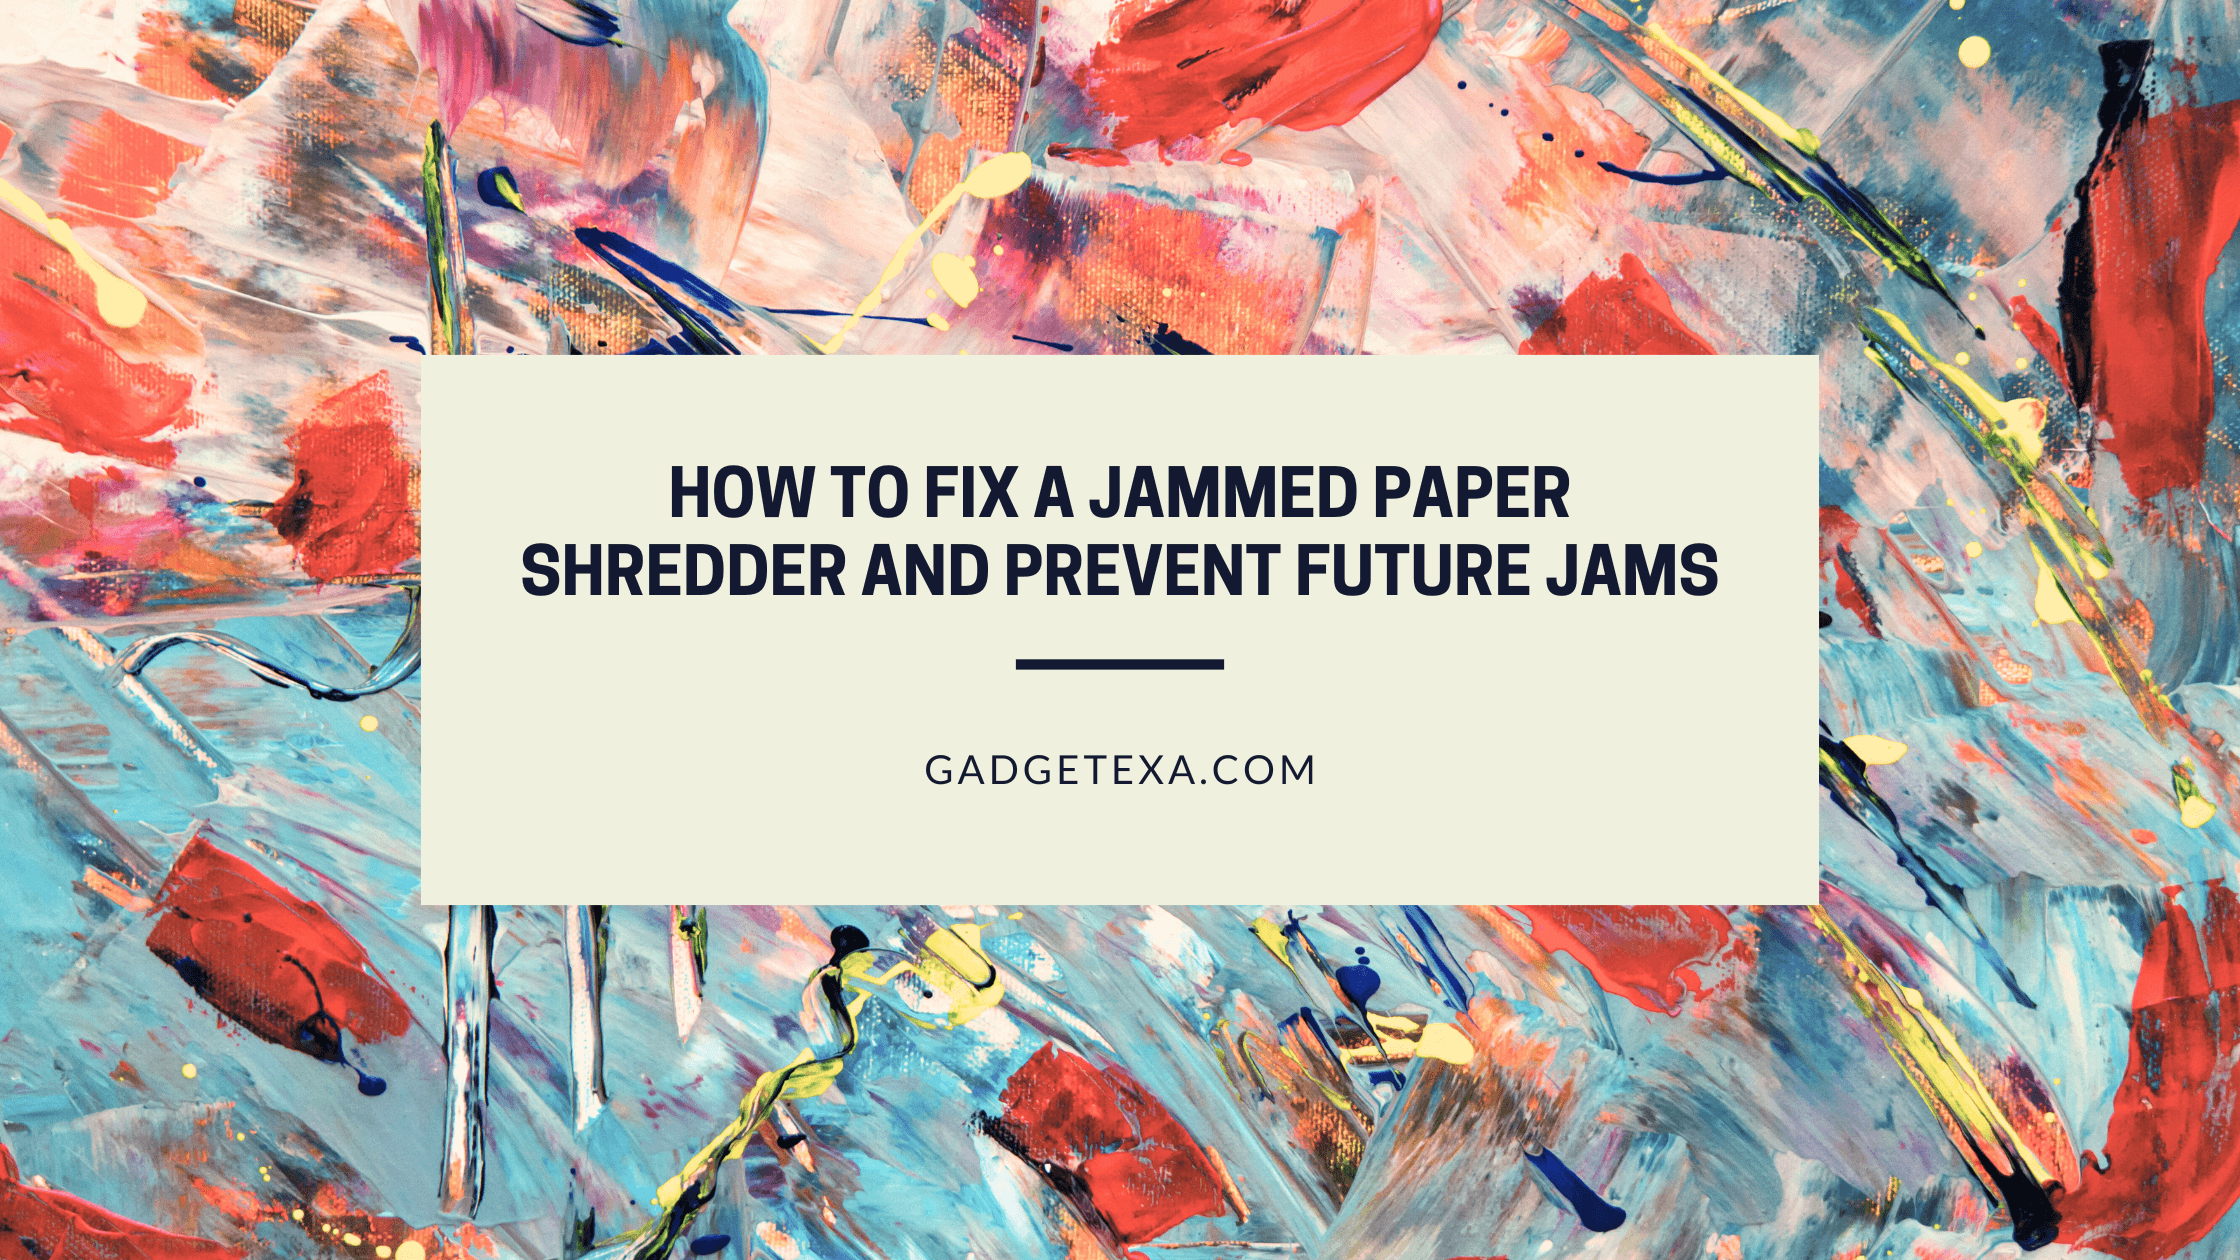 How to Fix a Jammed Paper Shredder and Prevent Future Jams (1)